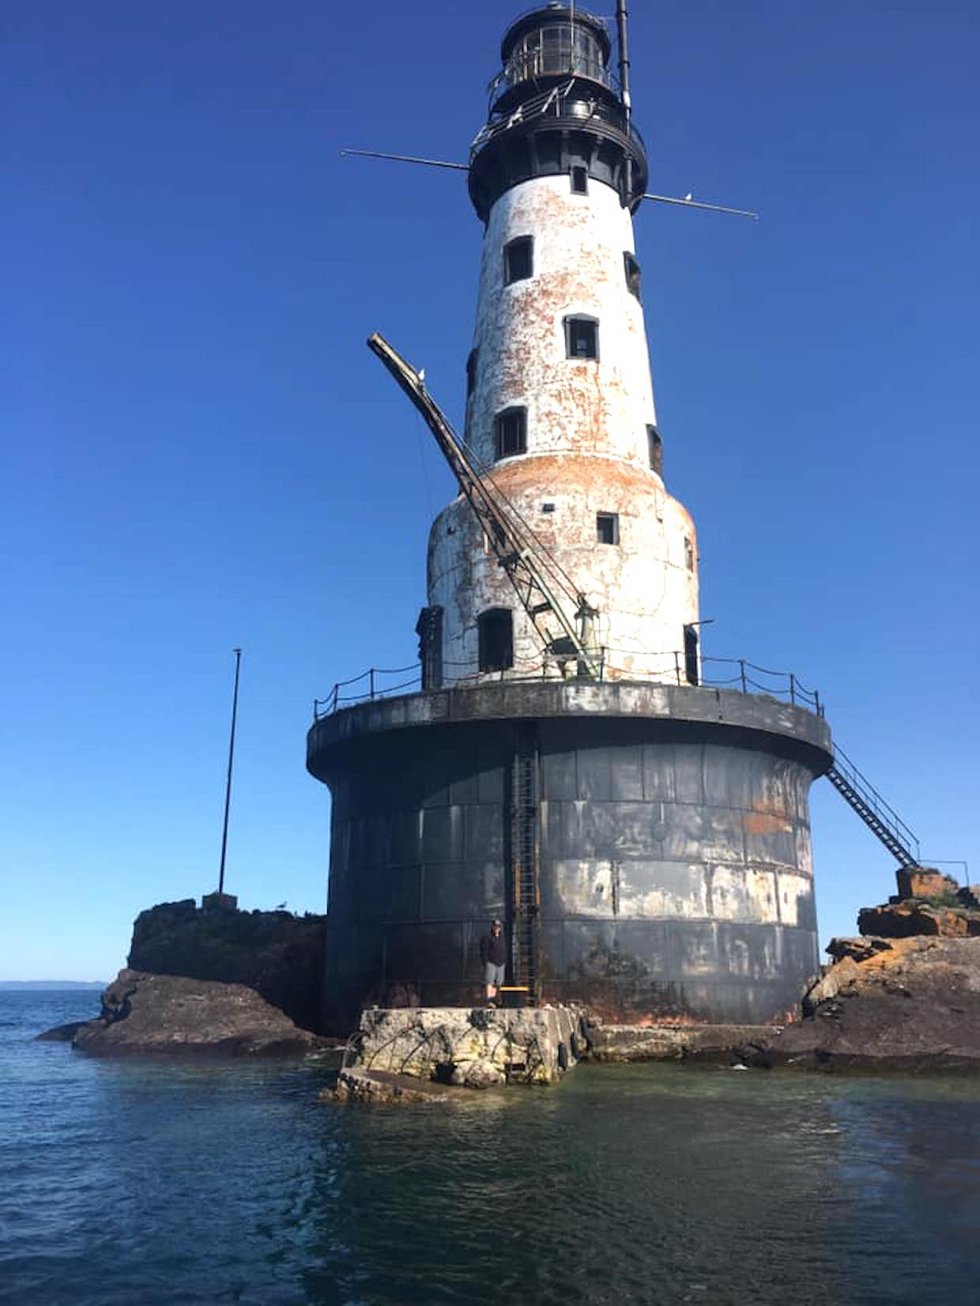 Rock of Ages Lighthouse